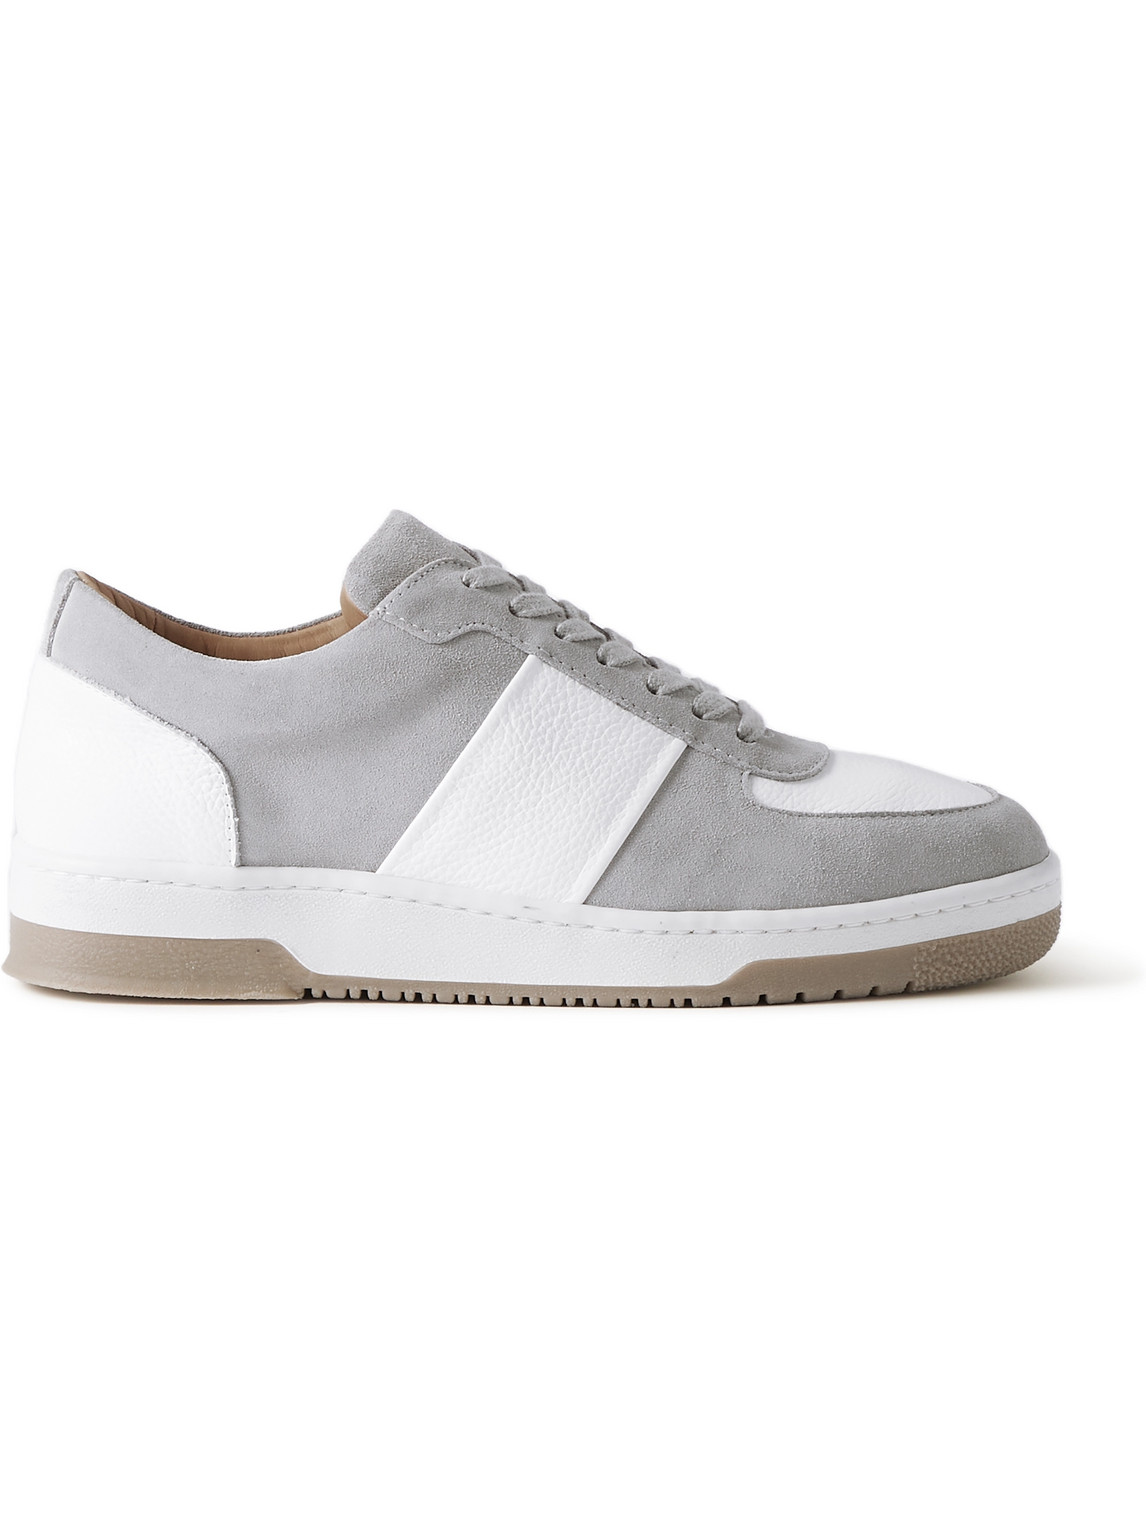 Mr P Atticus Suede And Full-grain Leather Trainers In Grey